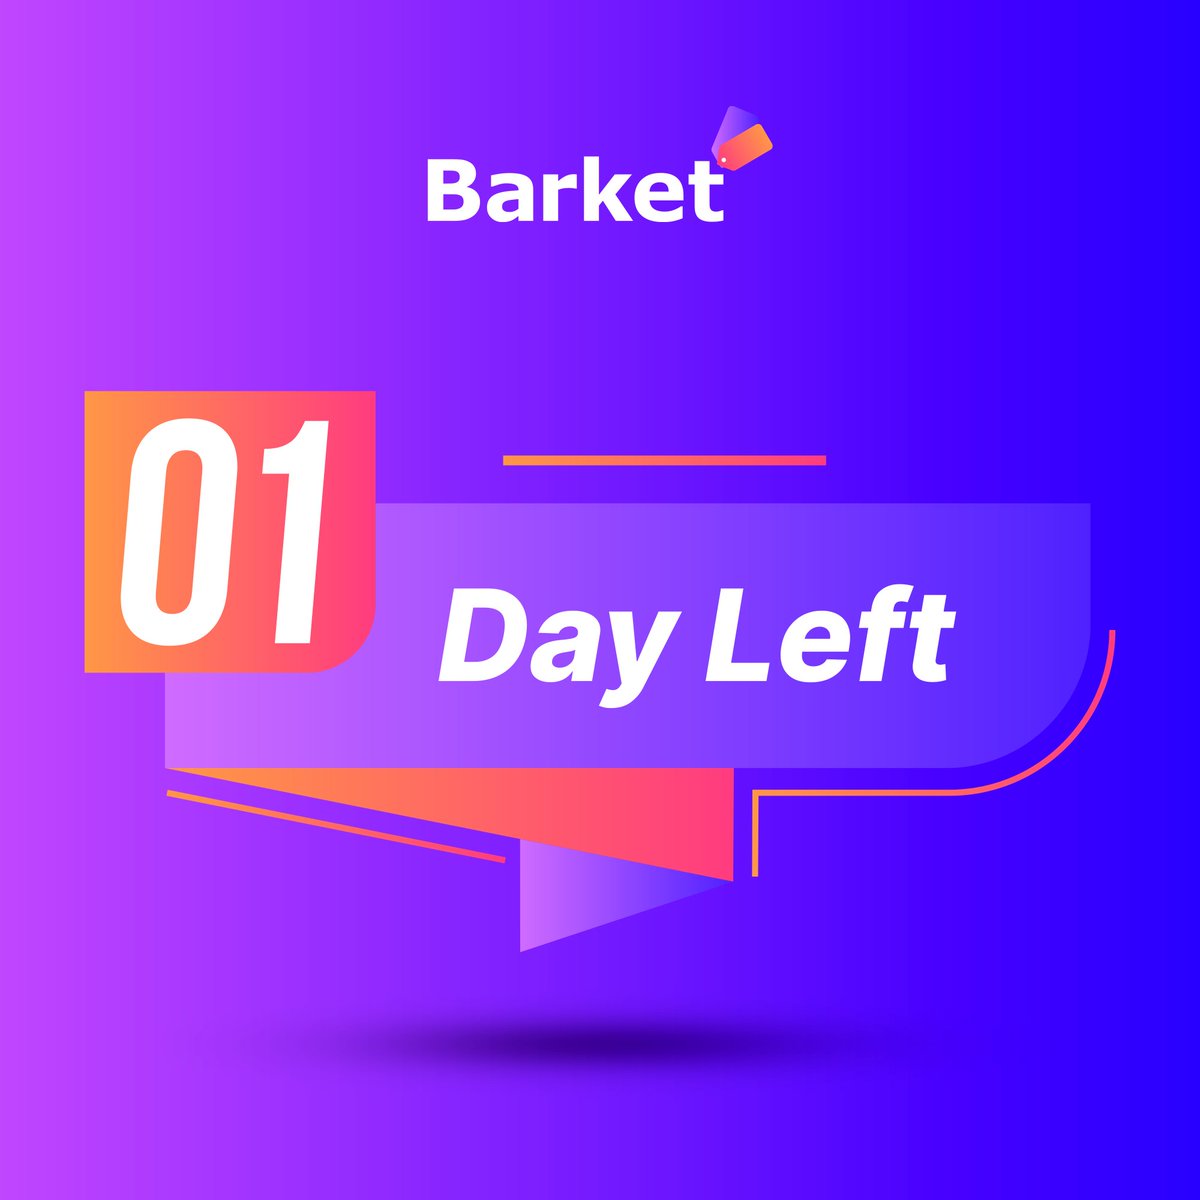 The final countdown is here! ⏰ Just 1 day left until April 15th, the day we've all been waiting for in the world of #crypto. Get ready to witness history in the making! 🎉

Don't forget to stay tuned for the big reveal from #BFIC at #InnovationFactory! 🔥
.
.
.
#Barket